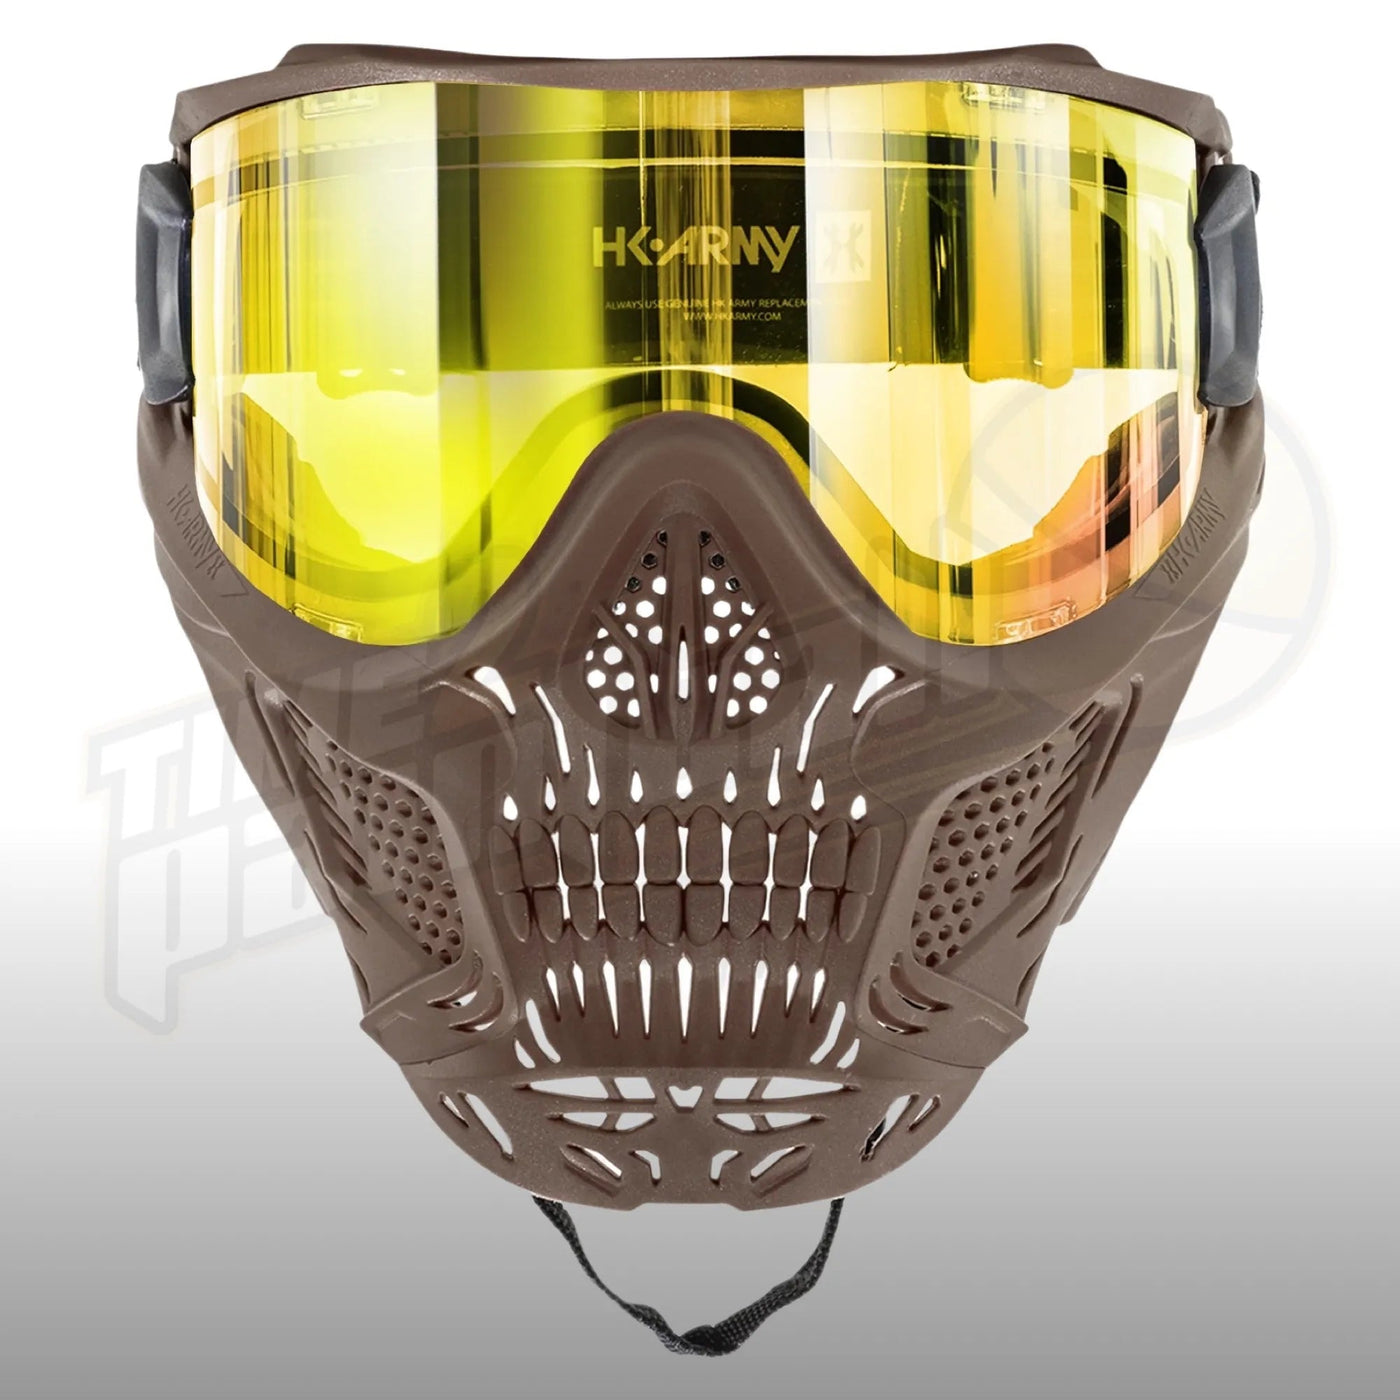 HK Army HSTL Skull Goggle Sandstorm Tan w/ Gold Lens - Time 2 Paintball